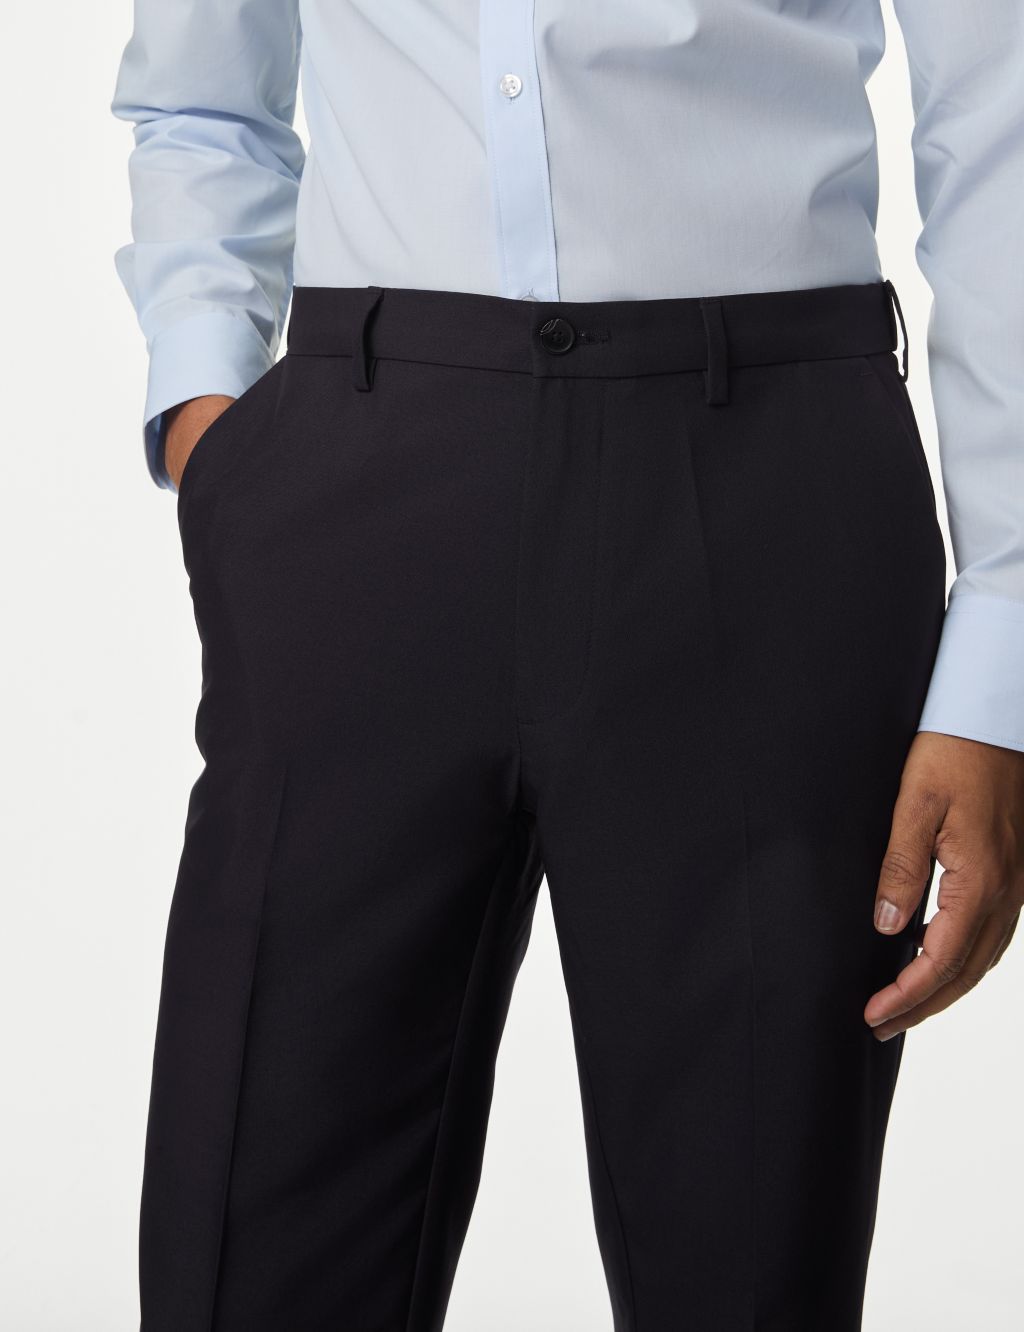 Slim Fit Trouser with Active Waist image 3